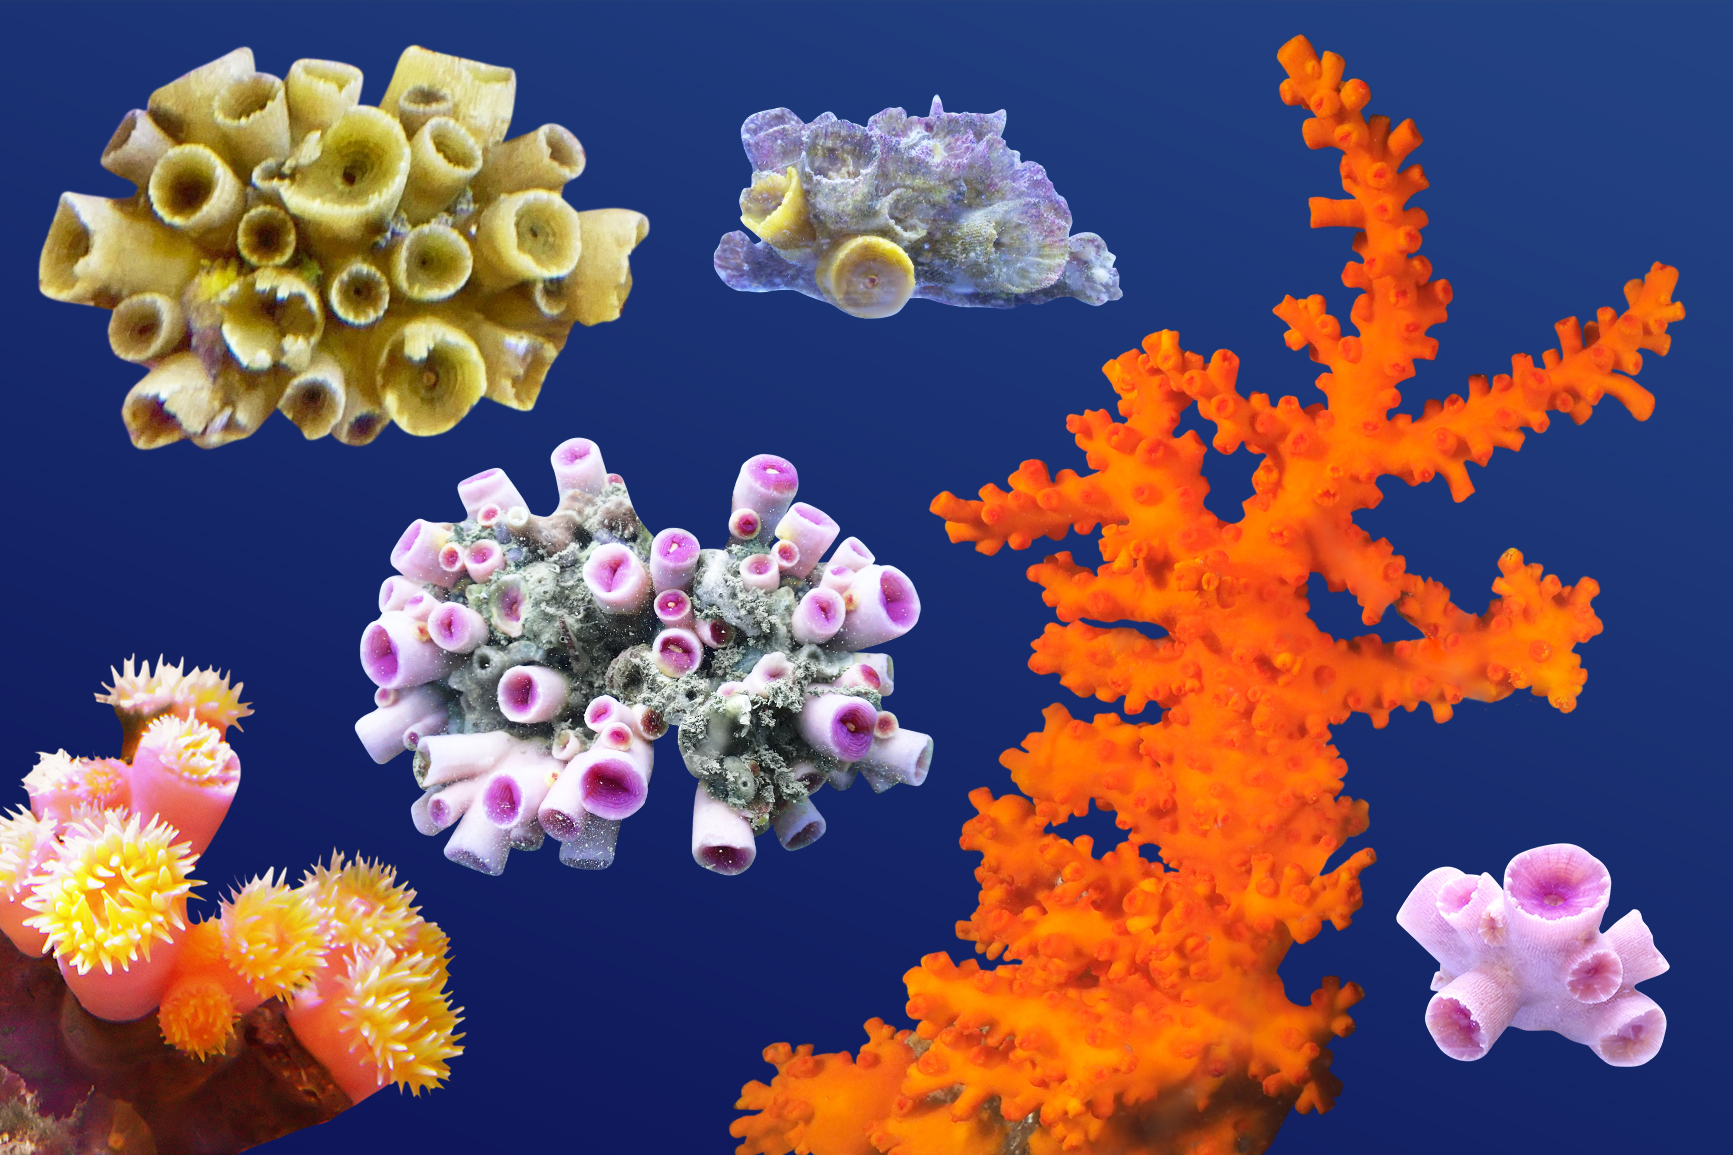 Colourful corals uncovered in Hong Kong waters